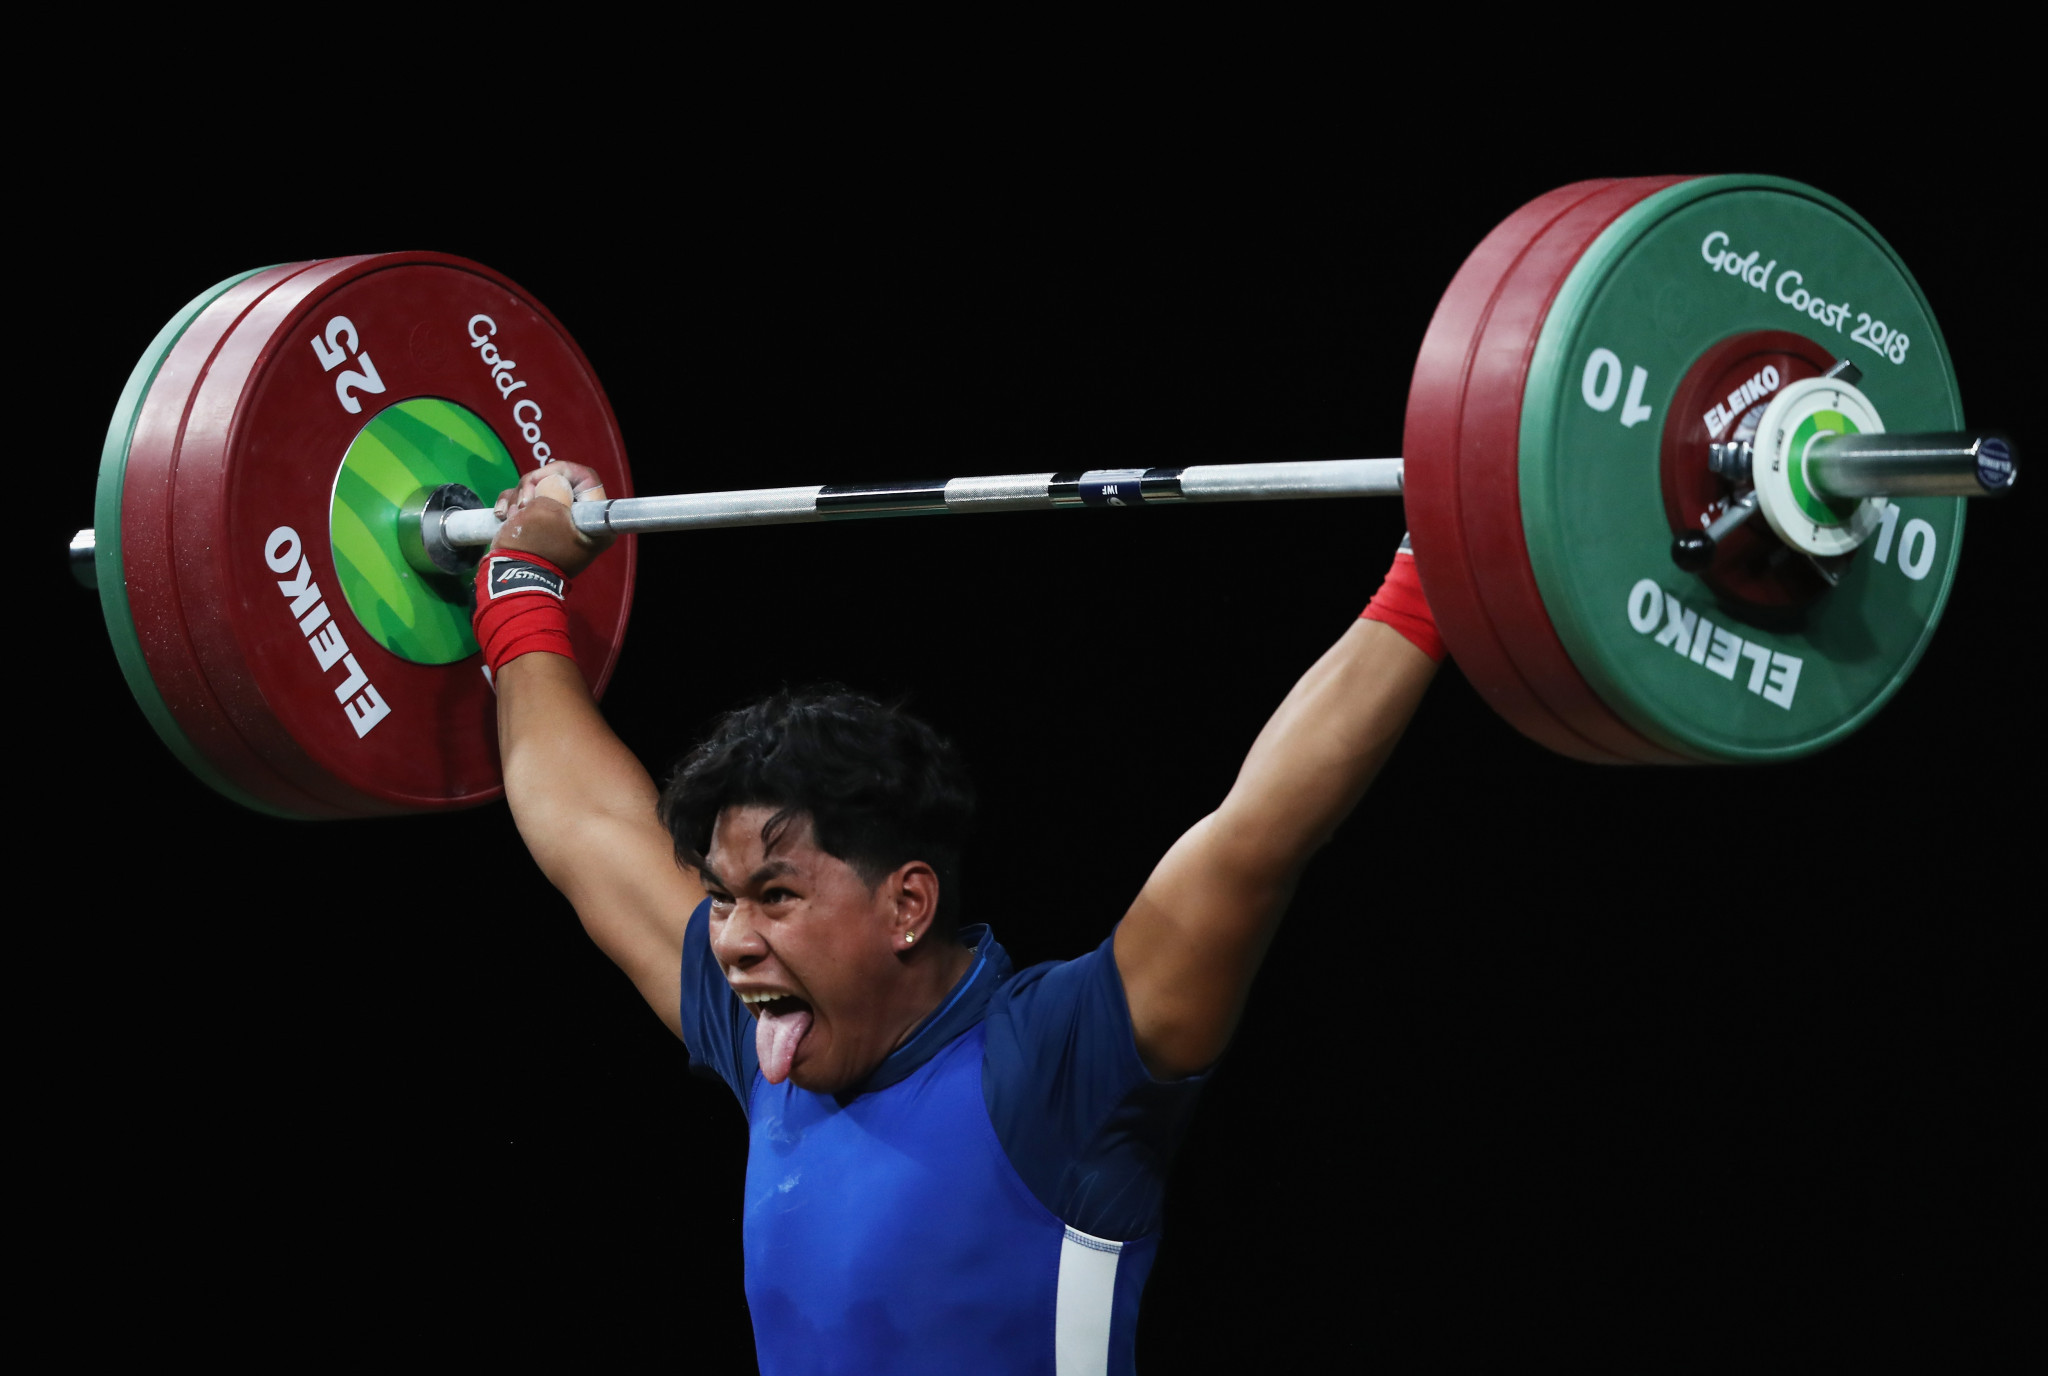 Don Opeloge was one of three Samoan weightlifters qualified for Tokyo 2020 ©Getty Images